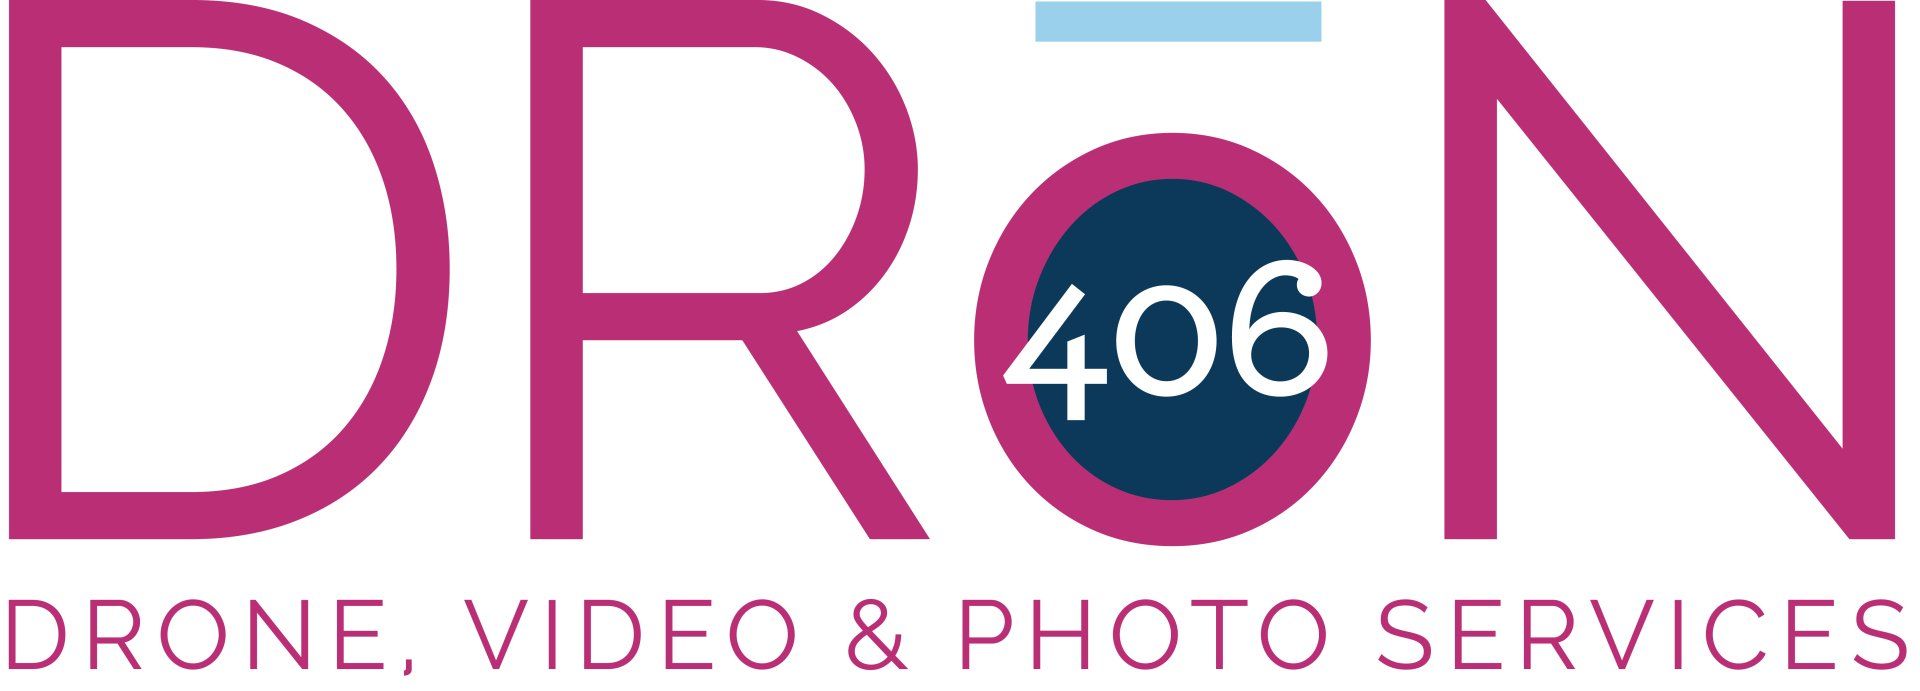 DRōN 406
Drone, Video and photo services logo